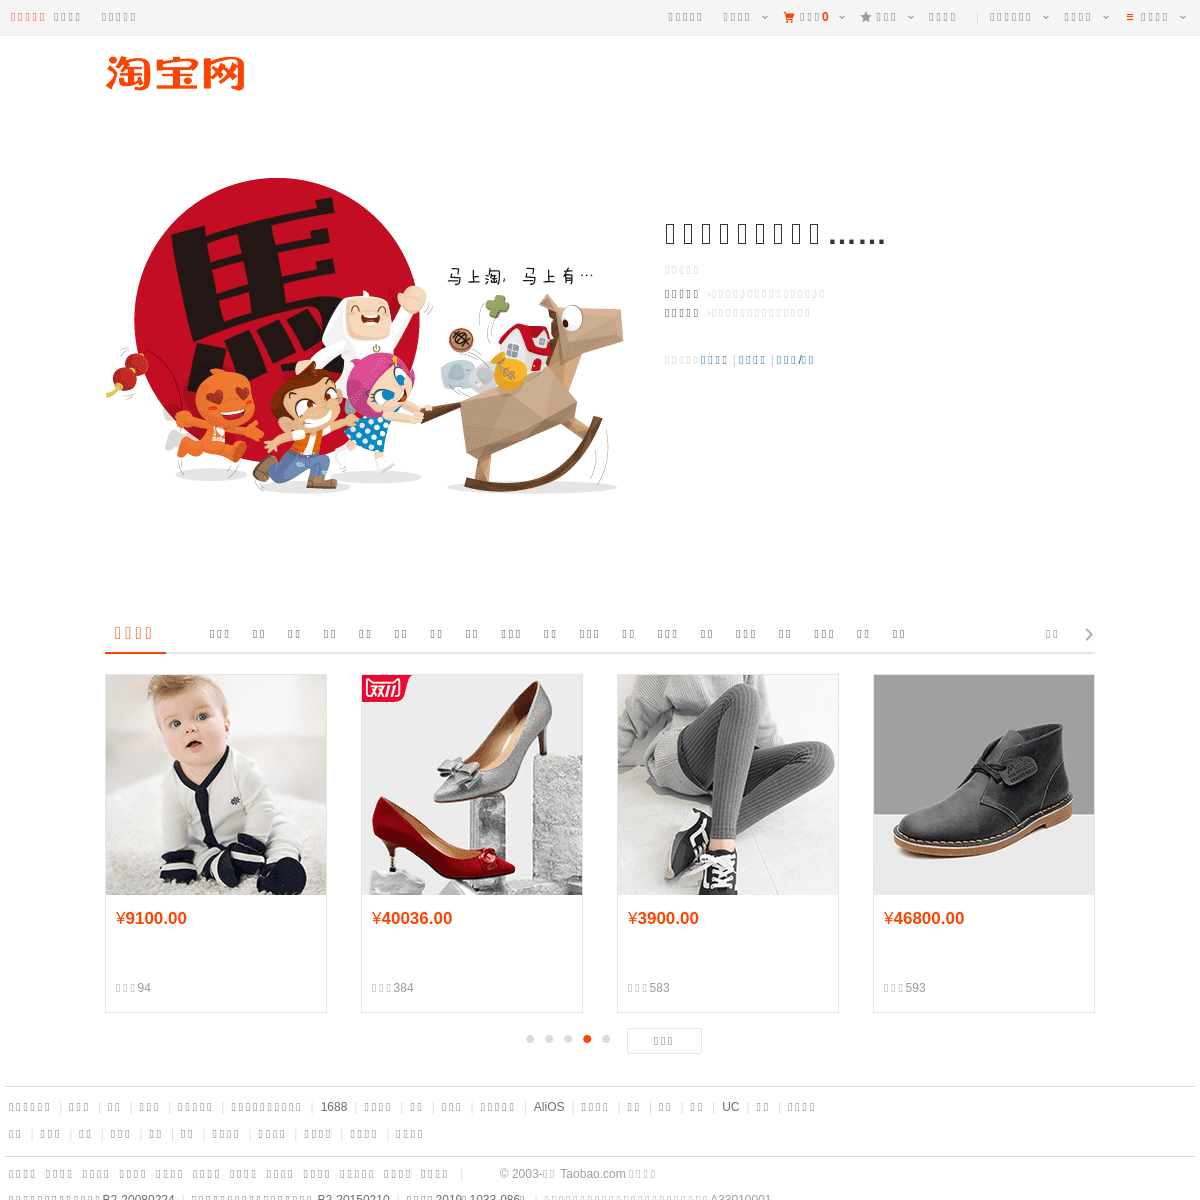 A complete backup of trade.tmall.com